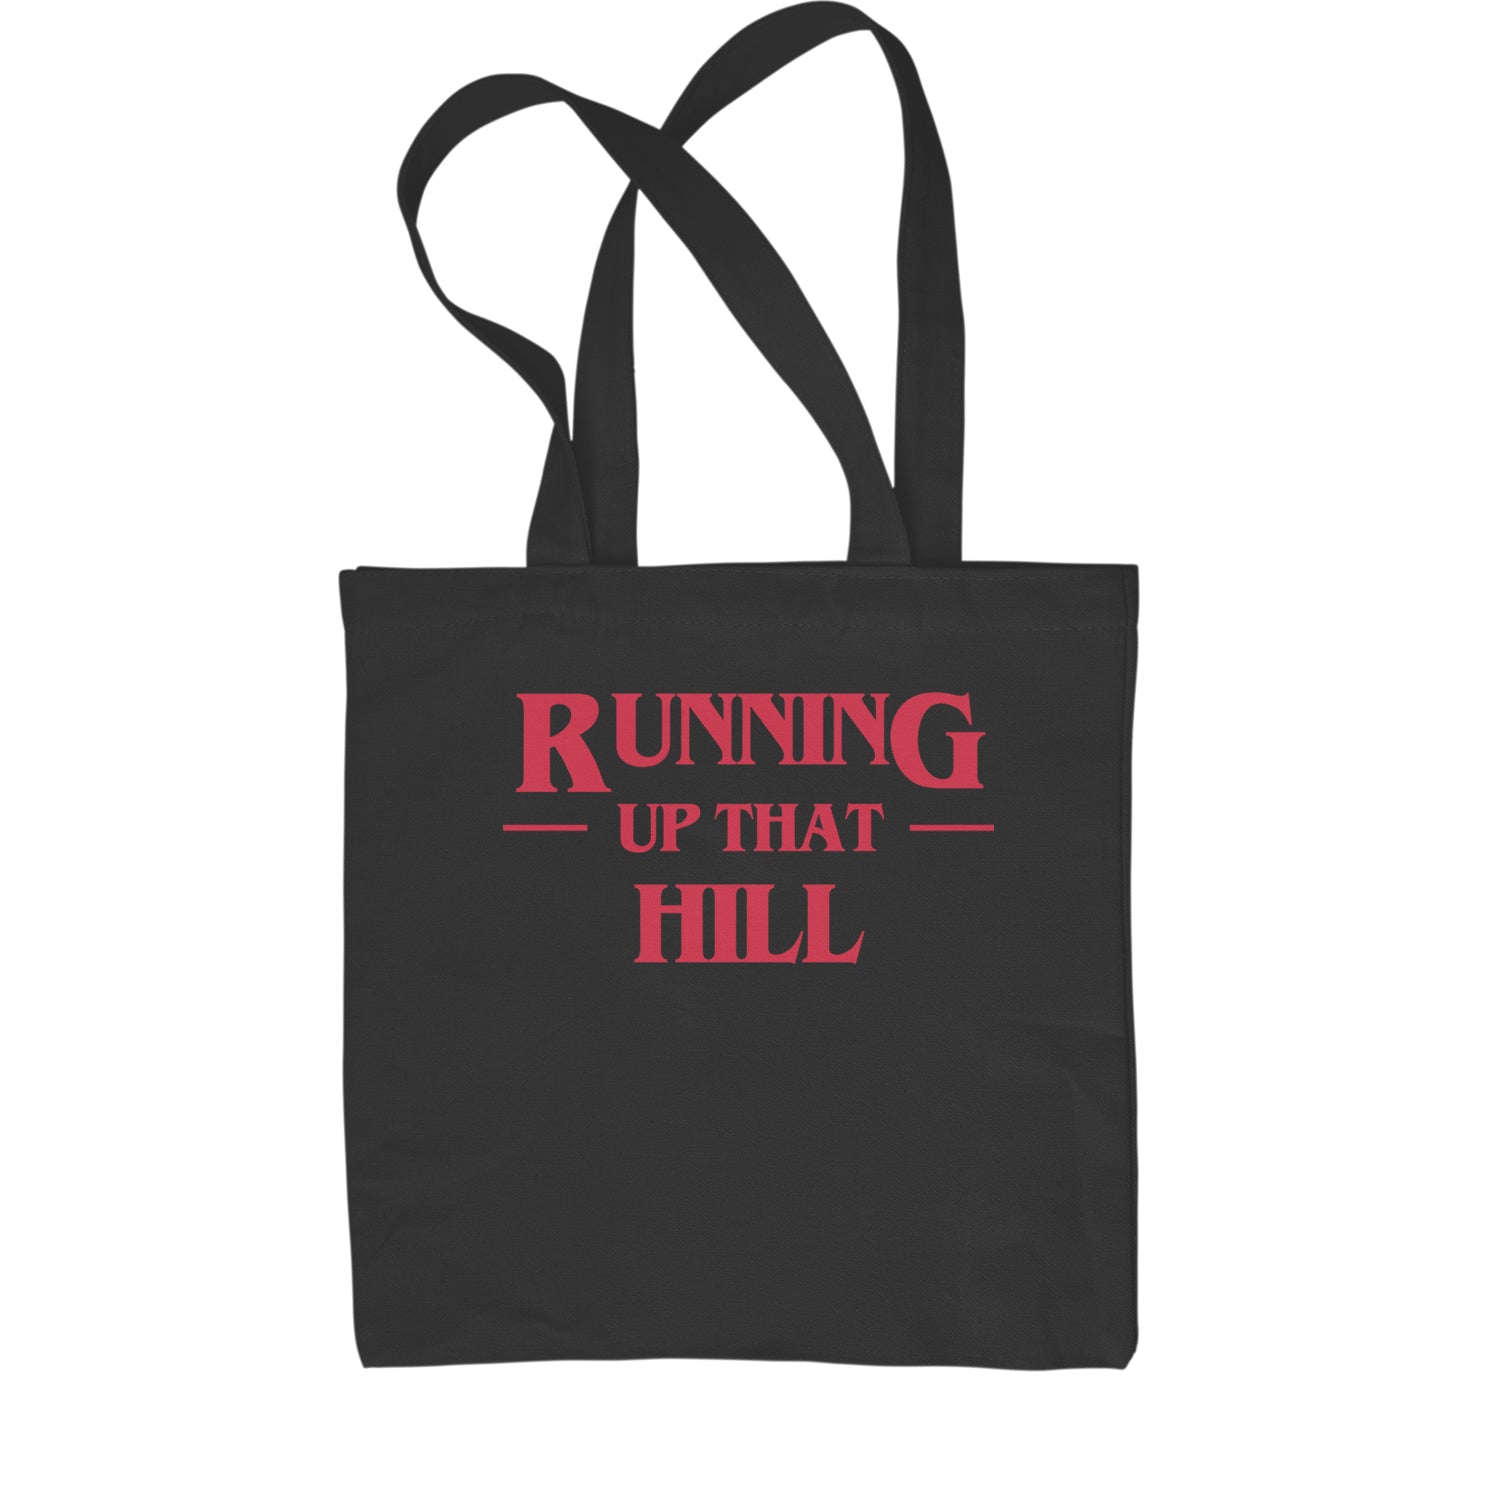 Running Up That Hill Shopping Tote Bag 4, don’t, eleven, four, friends, lie, season by Expression Tees